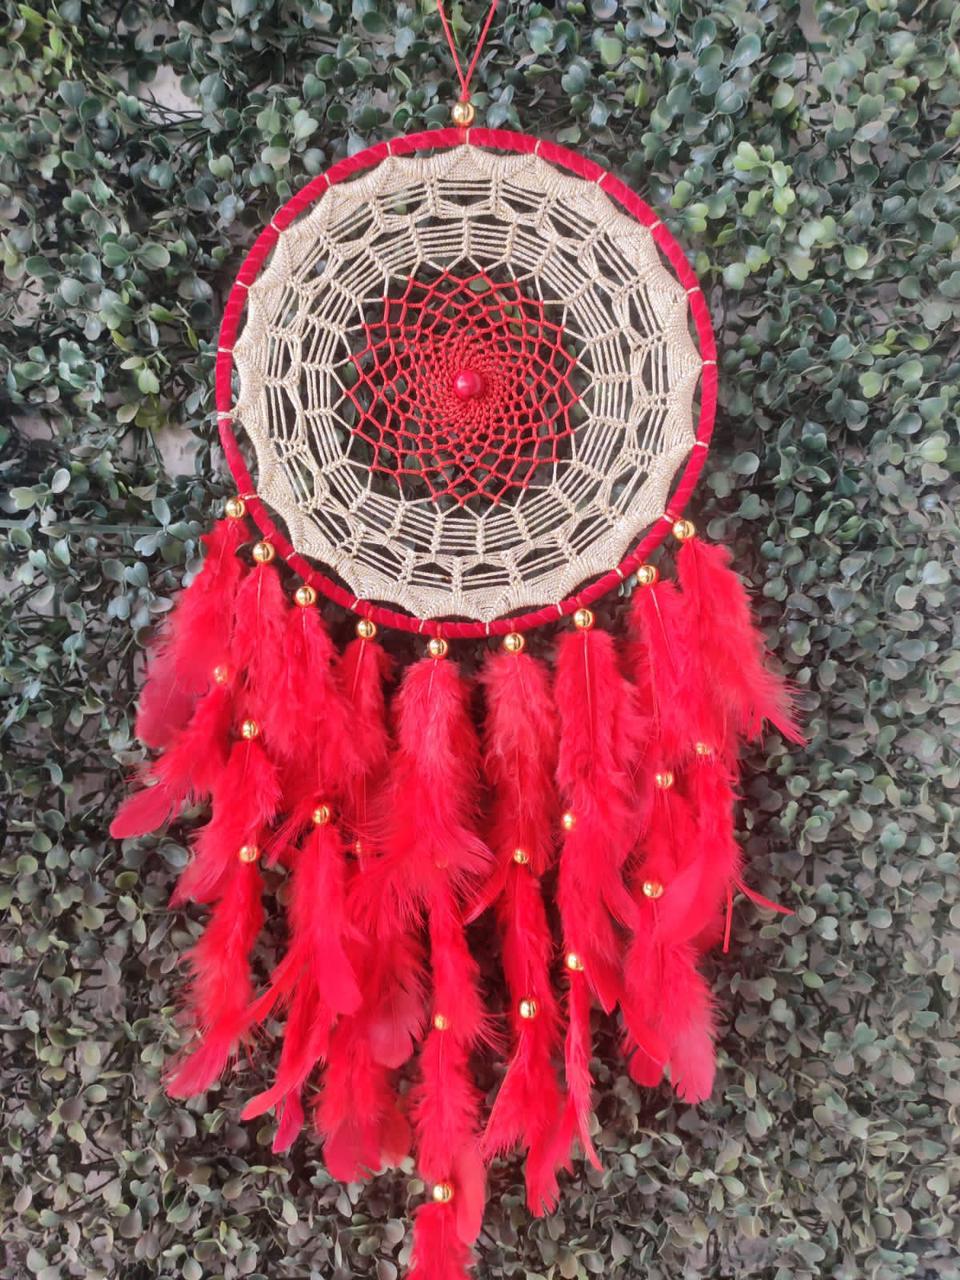 Let's catch dream- Red and White Dreamcatcher